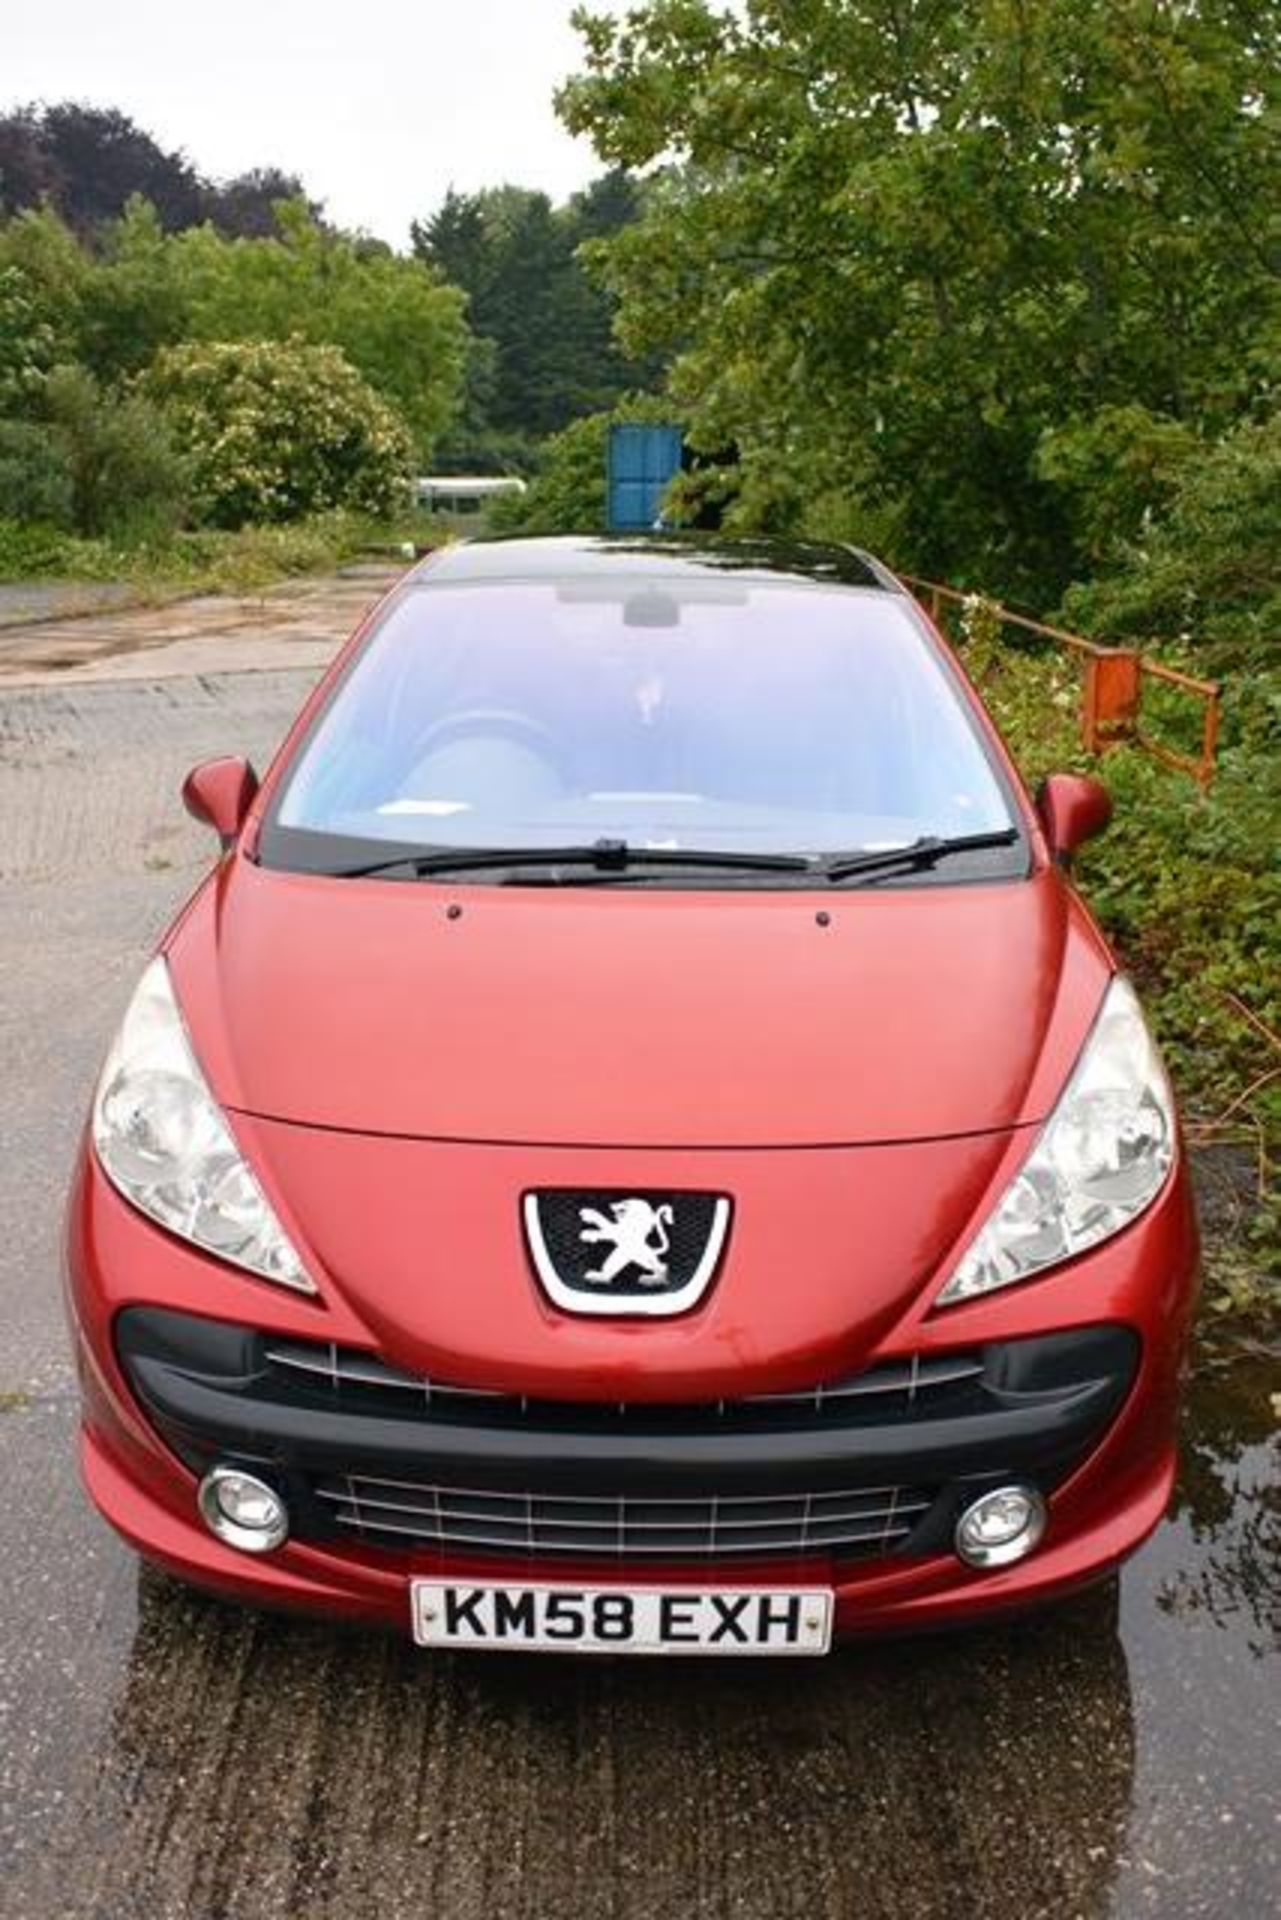 Peugeot 207, reg no: KM58 EXH, mileage: 78,957, MOT: t.b.c., panoramic roof (please note: spares - Image 2 of 5